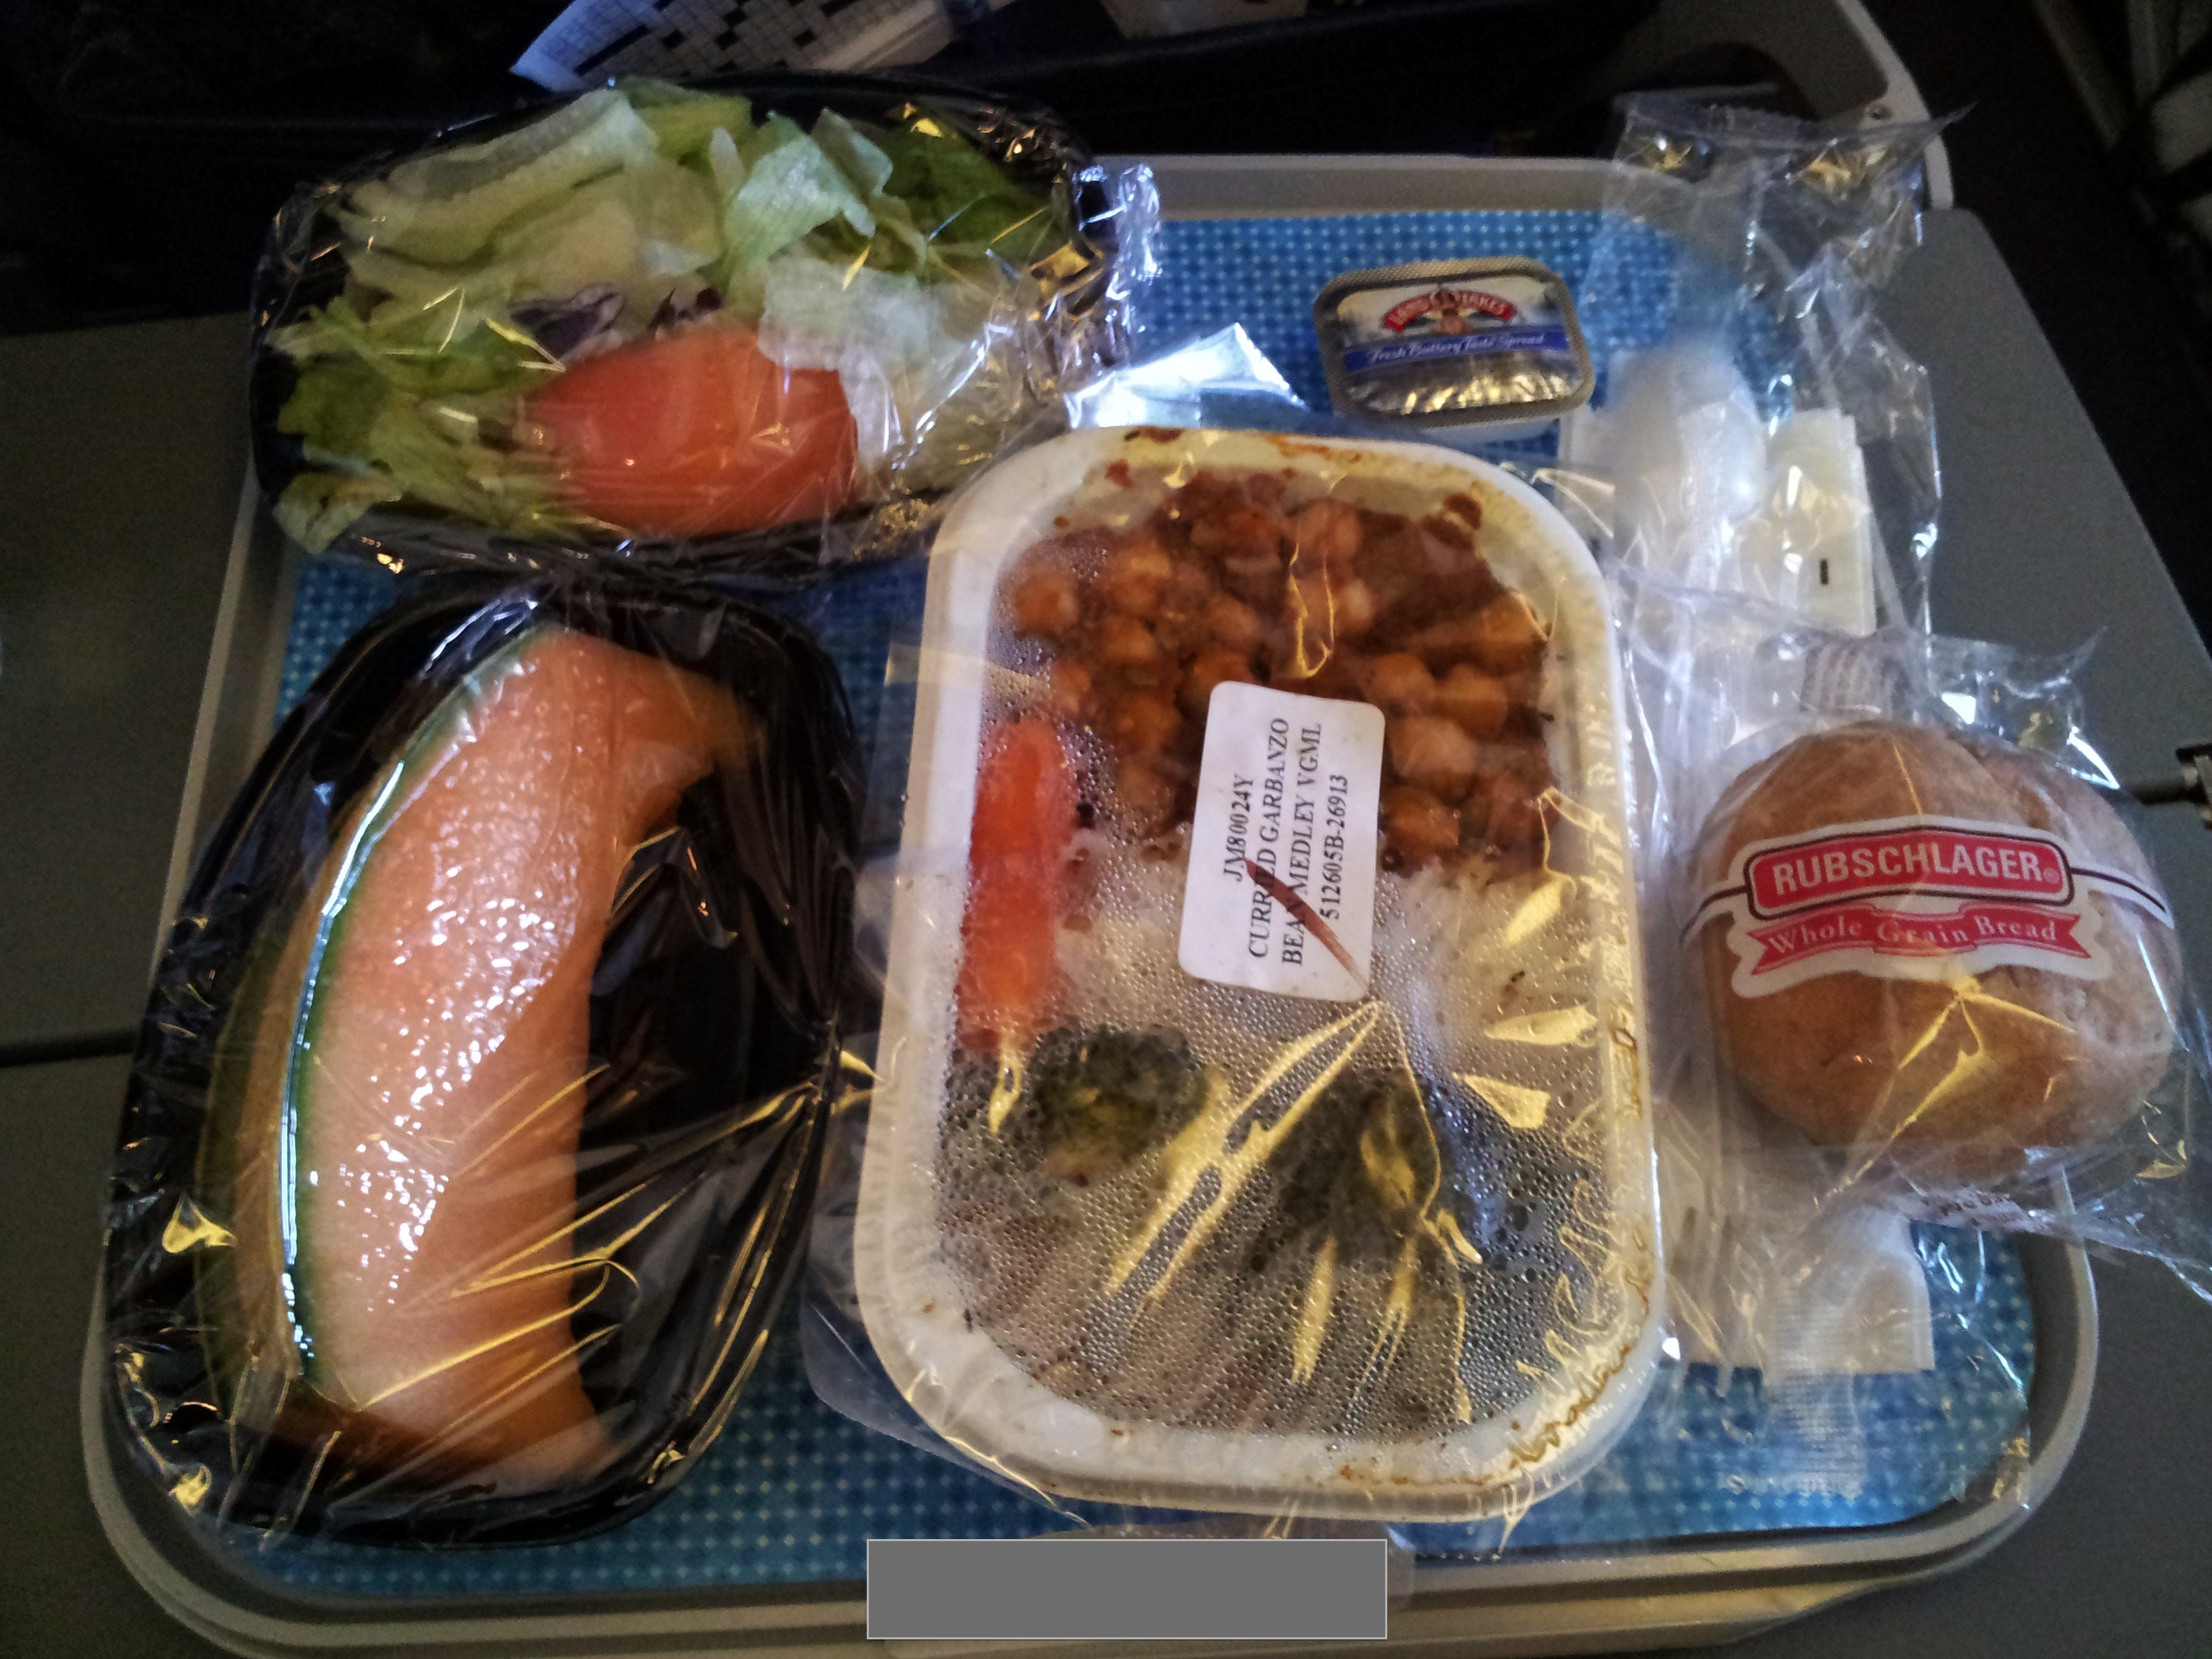 Vegetarian Economy Meals on American Airlines - Efficient Asian Man